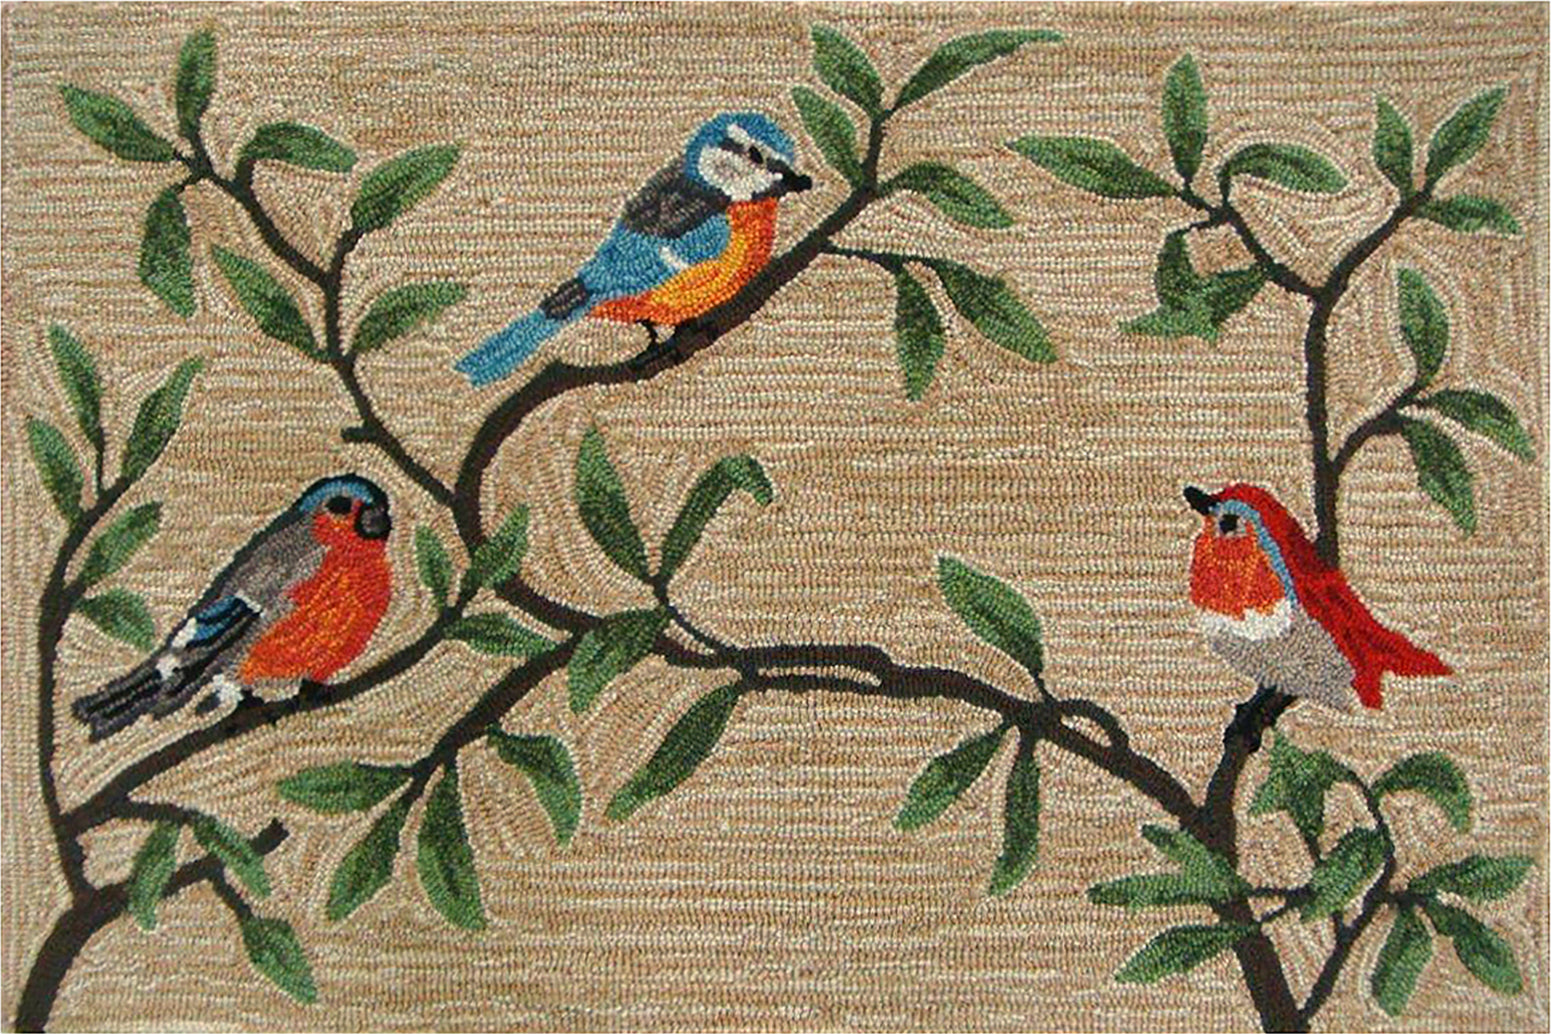 Birds on Branches Indoor Outdoor Rugs by Liora Manne